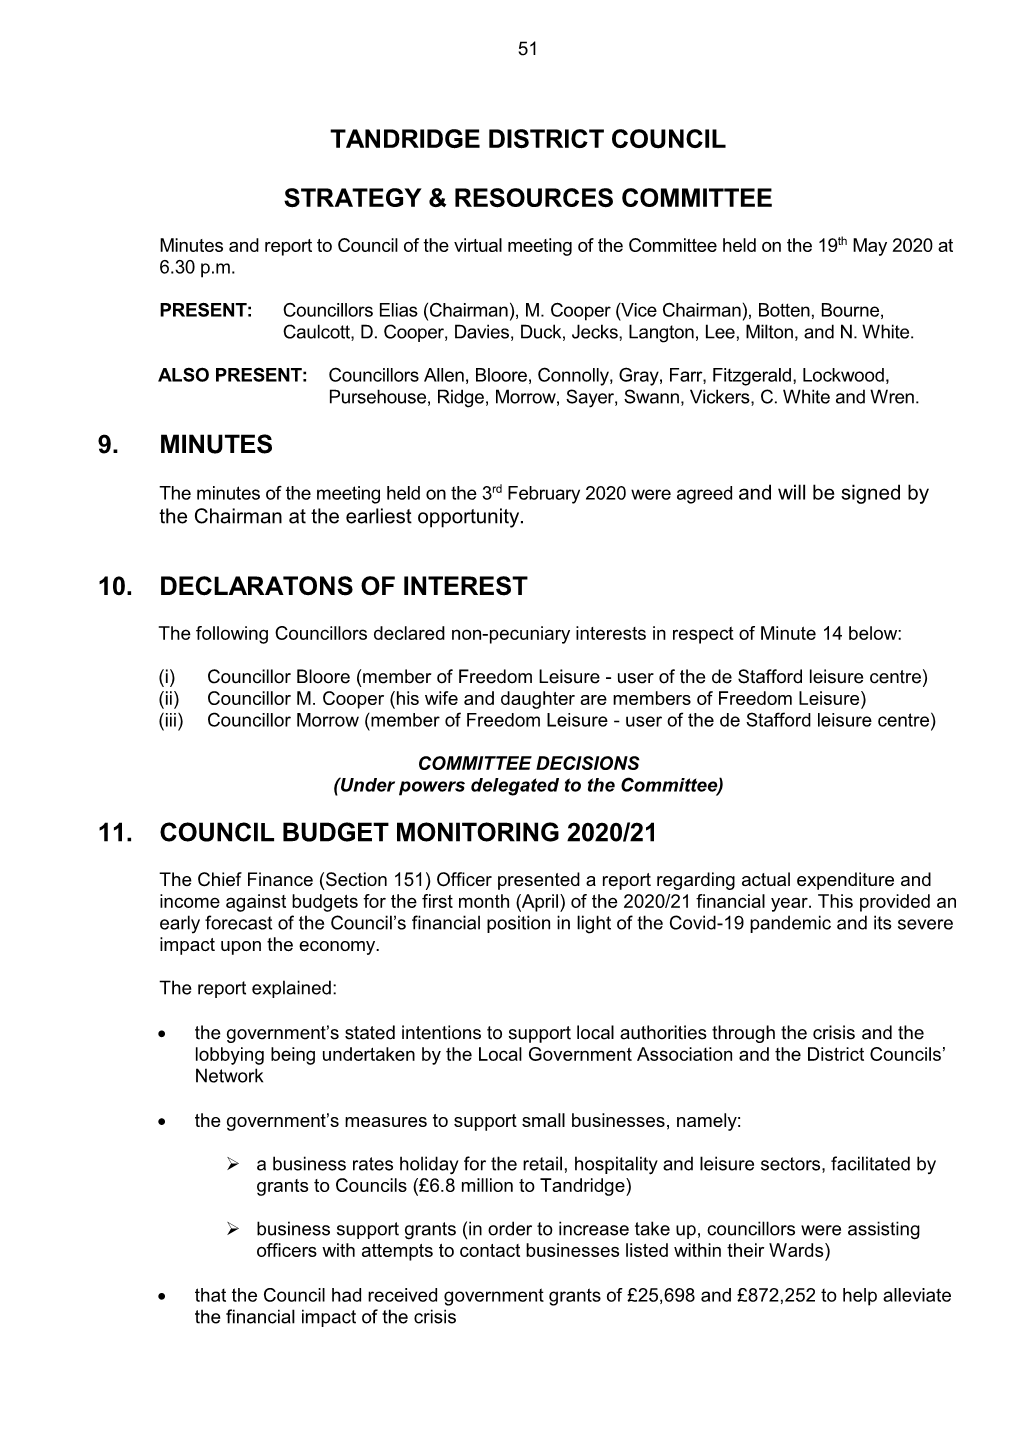 Tandridge District Council Strategy & Resources Committee